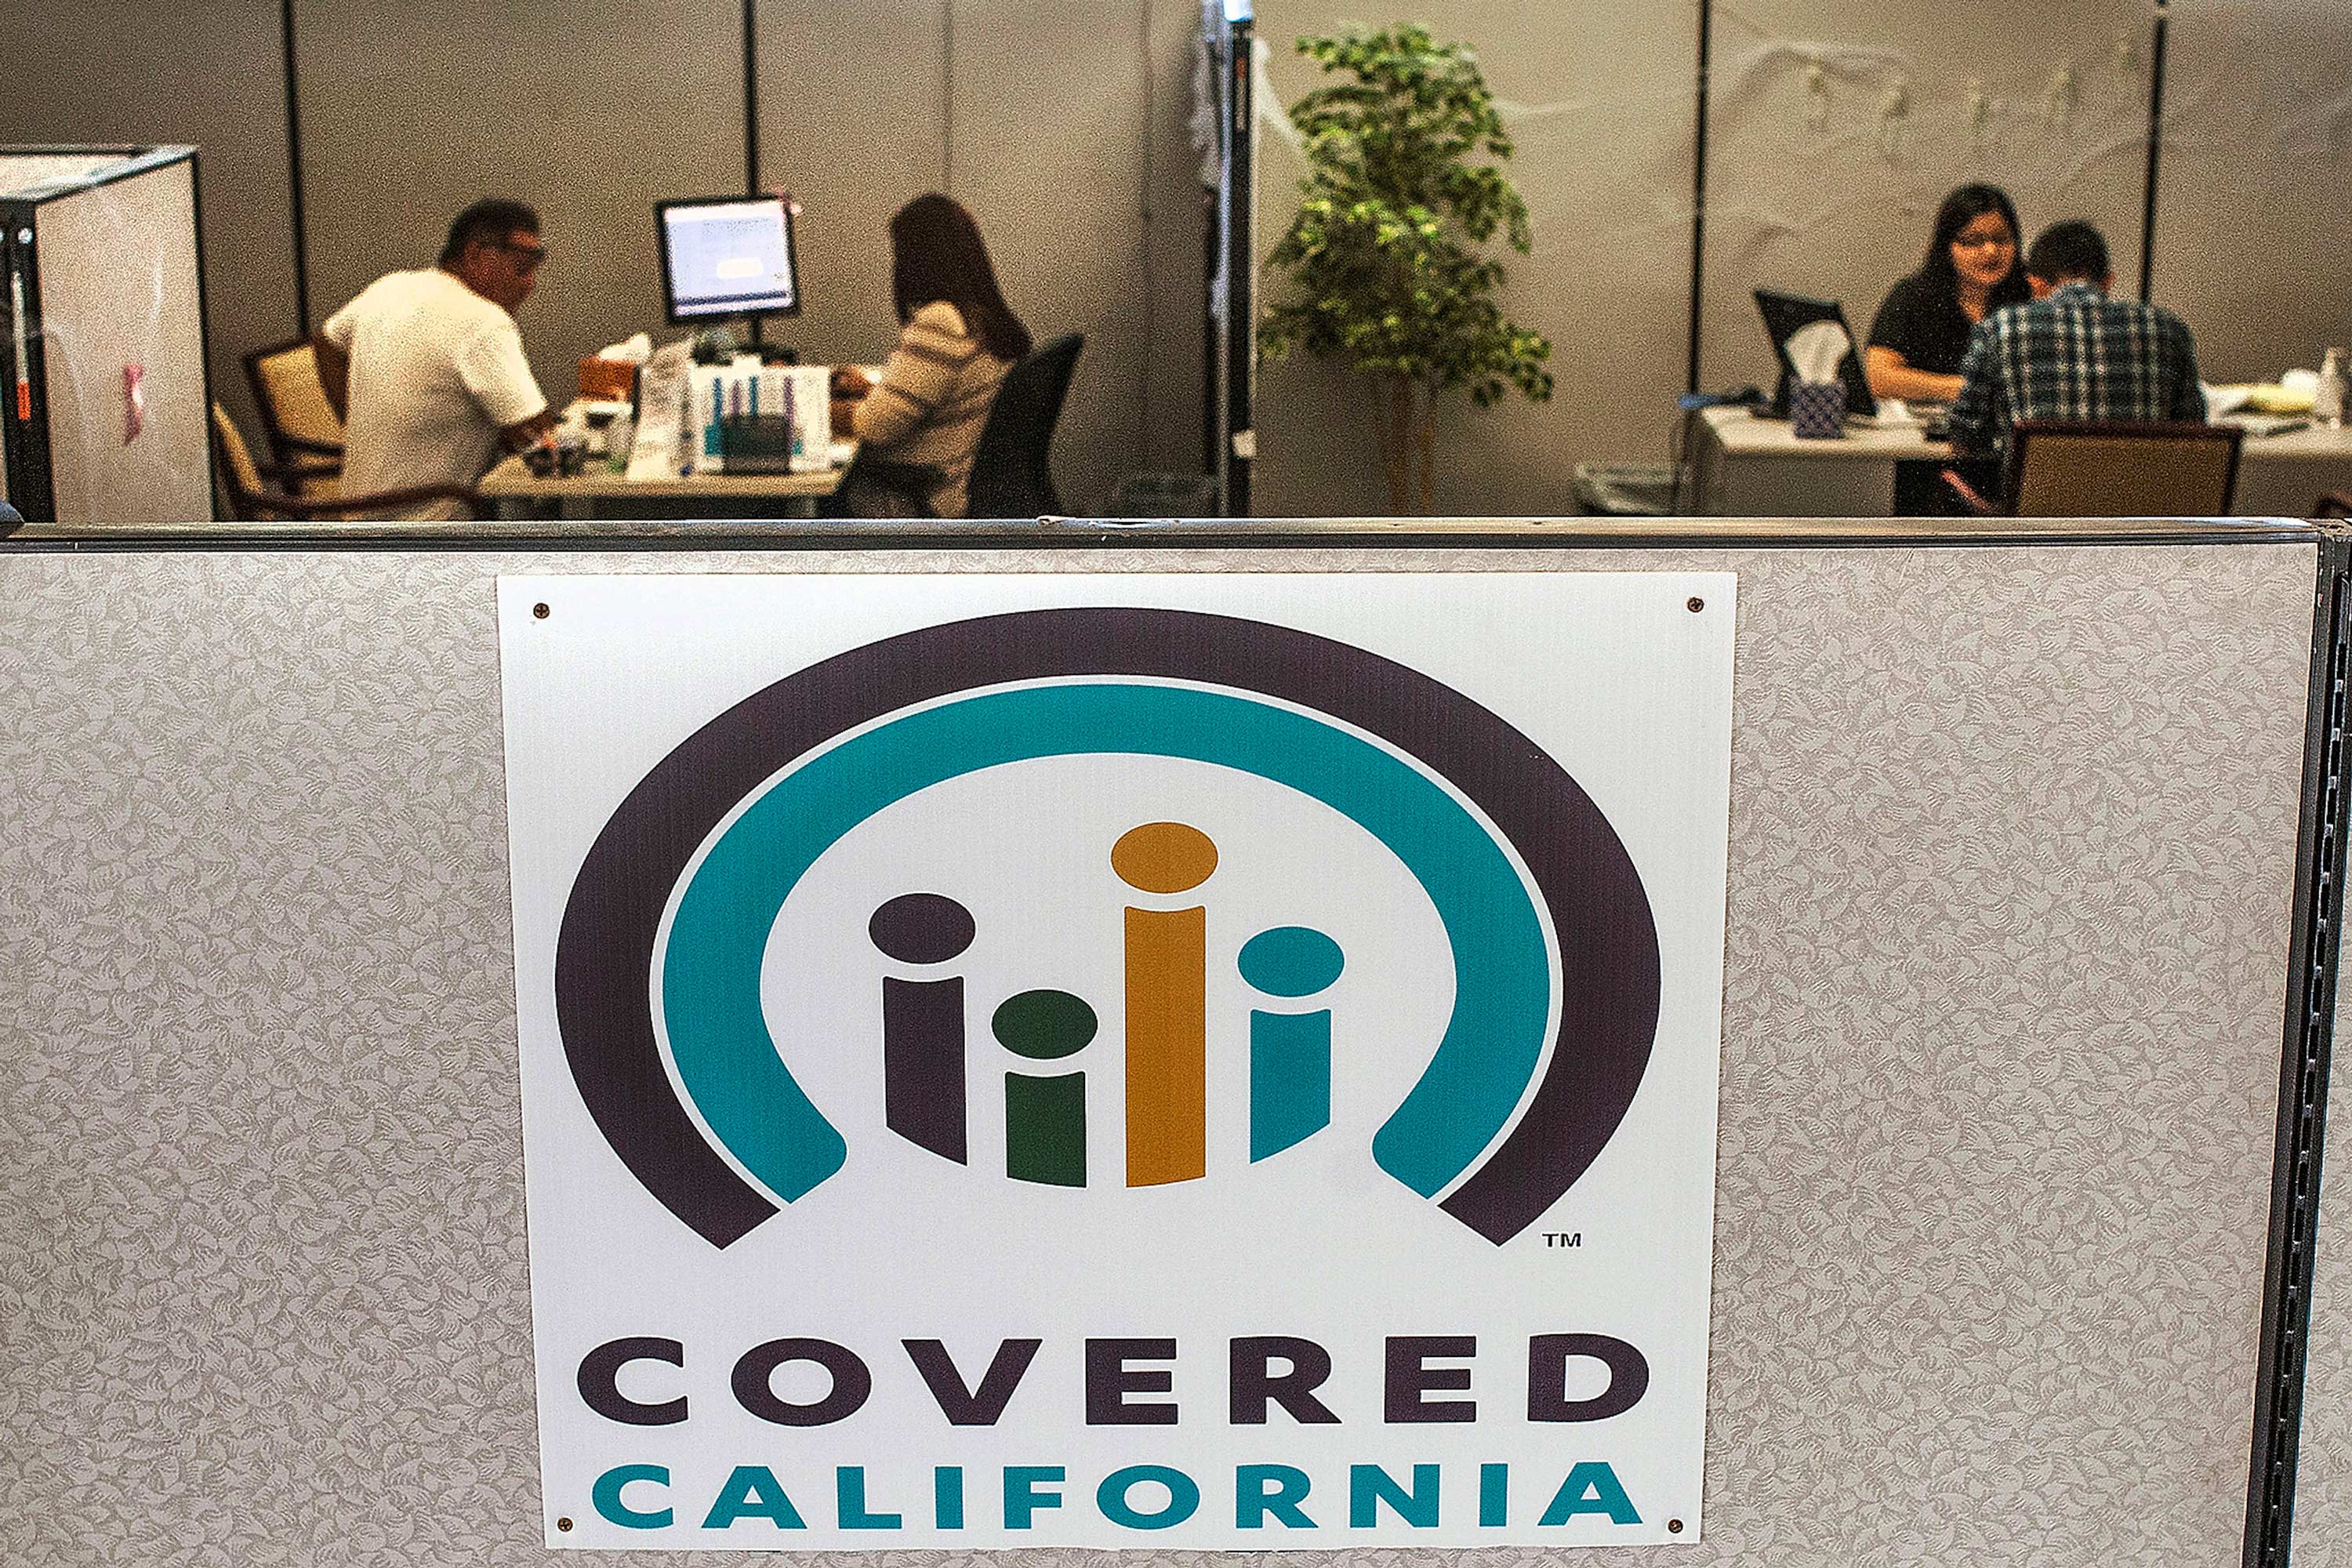 A photo of the "Covered California" logo on an office cubicle interior.